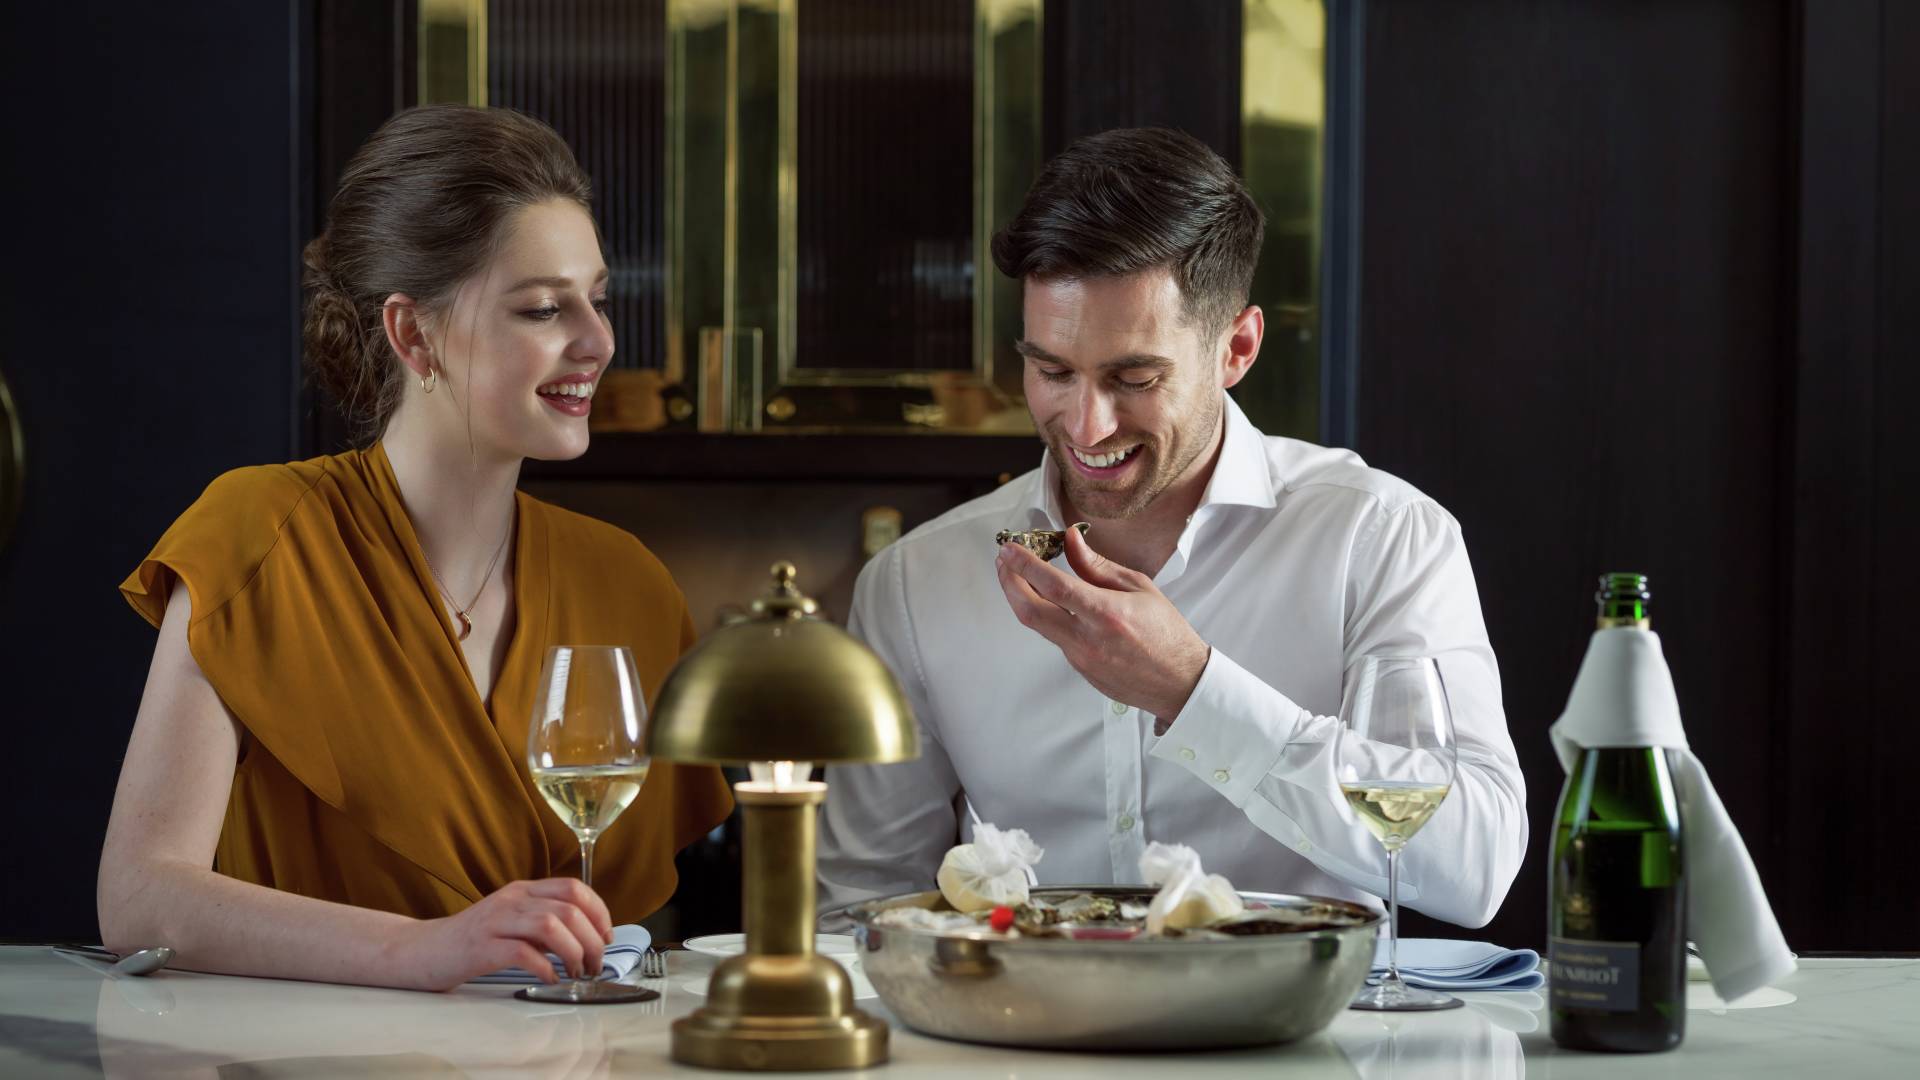 Man and Woman Laughing over Meal